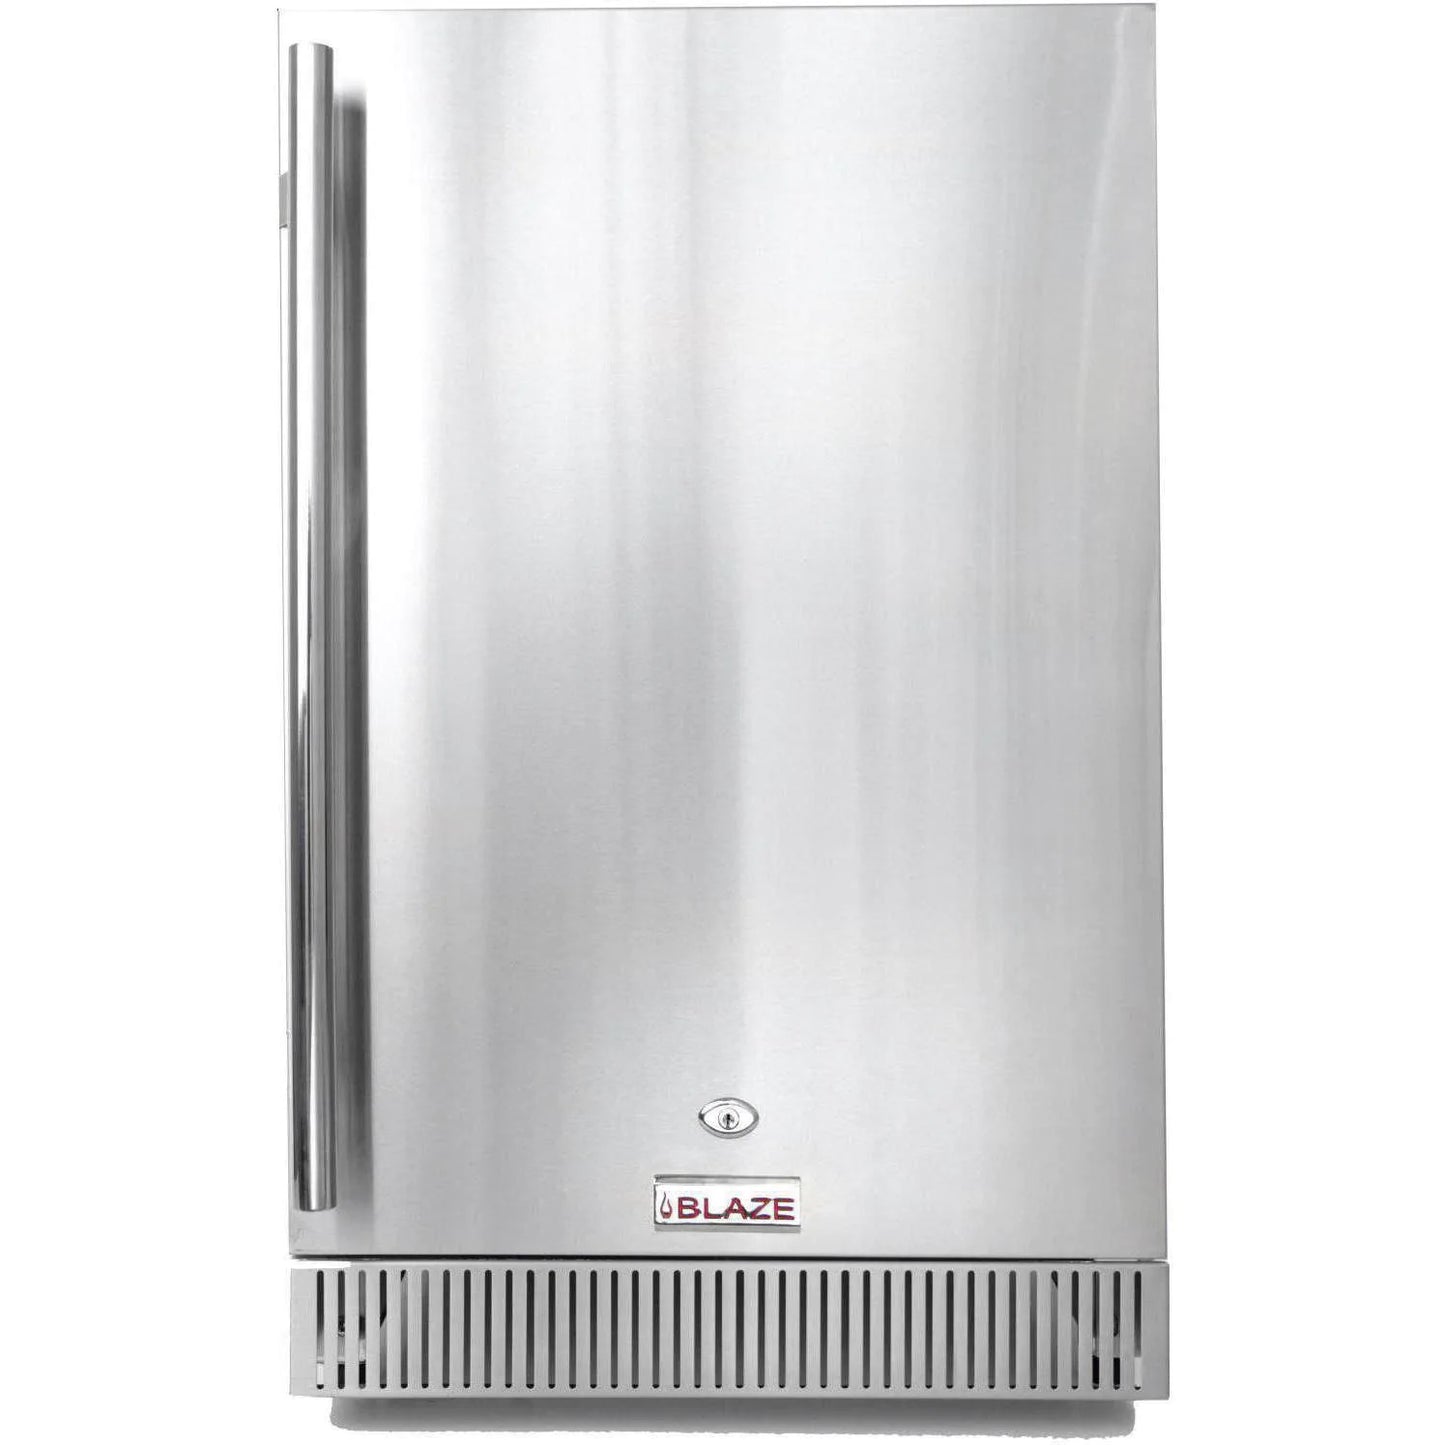 Outdoor rated stainless fridge SKU BLZ-SSRF-40DH